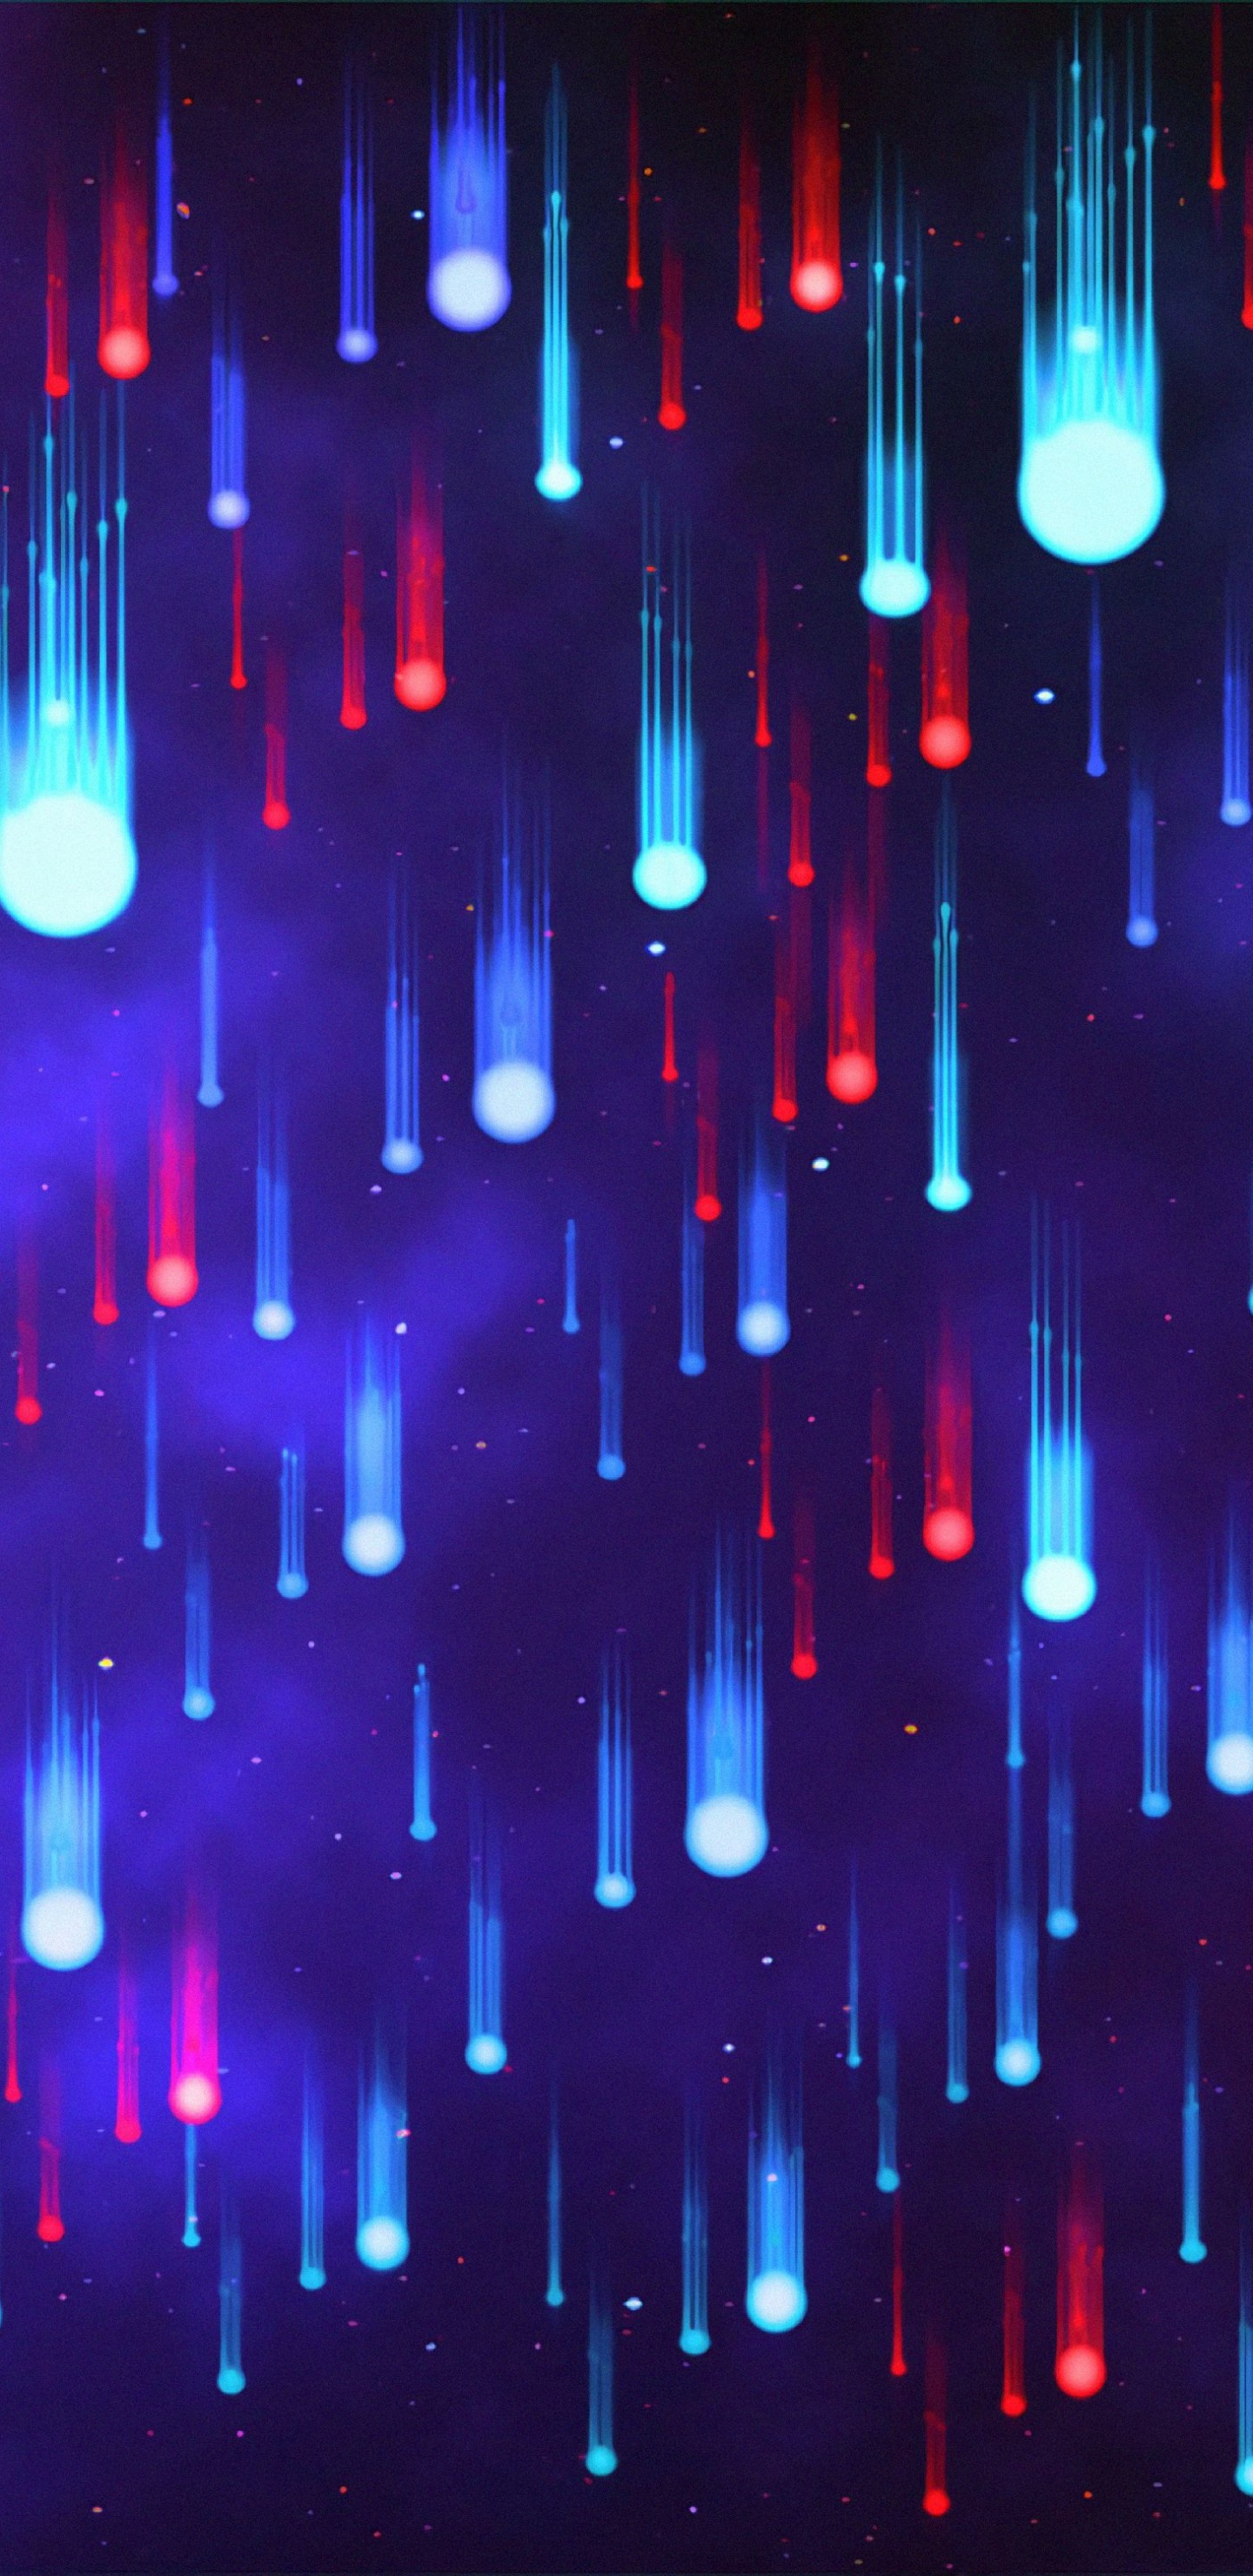 Pink and Blue Lights on a Dark Room. Wallpaper in 1440x2960 Resolution